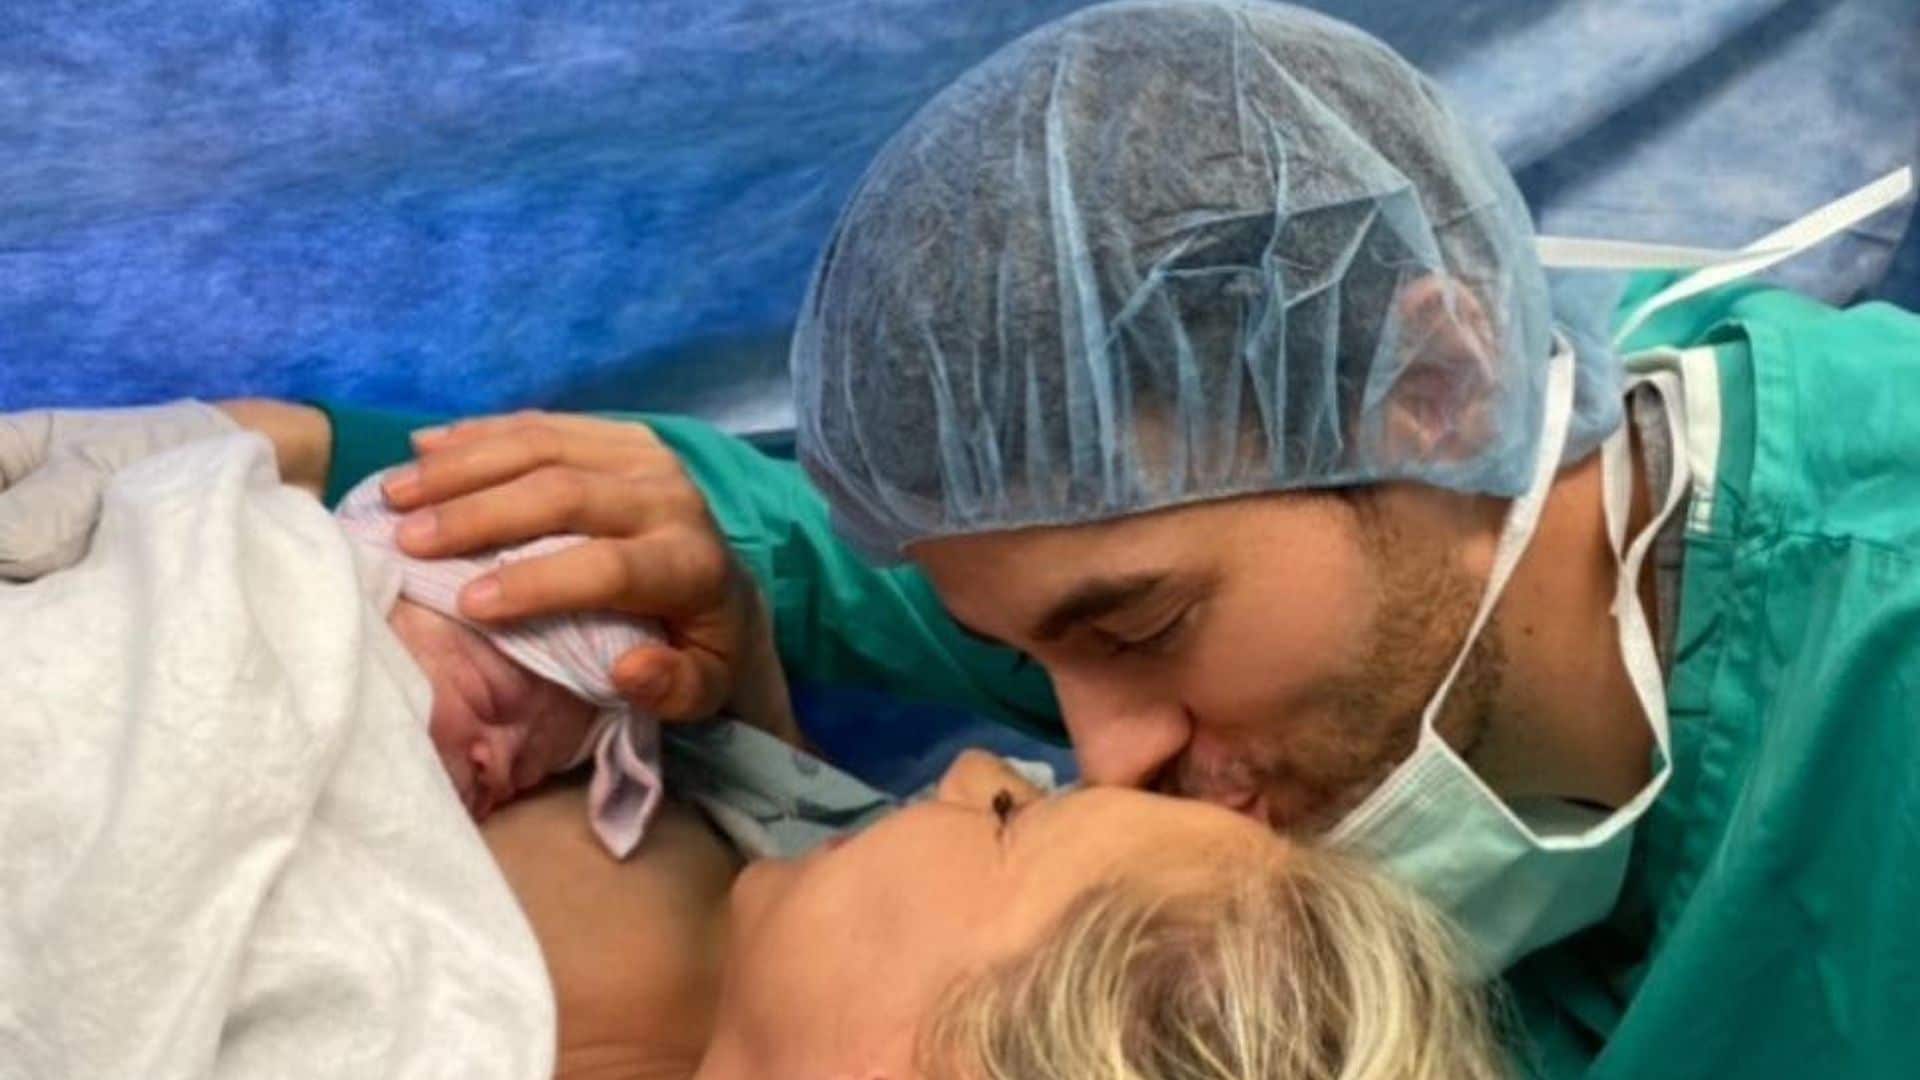 Enrique Iglesias and Anna Kournikova’s new baby daughter is here - See the adorable photos